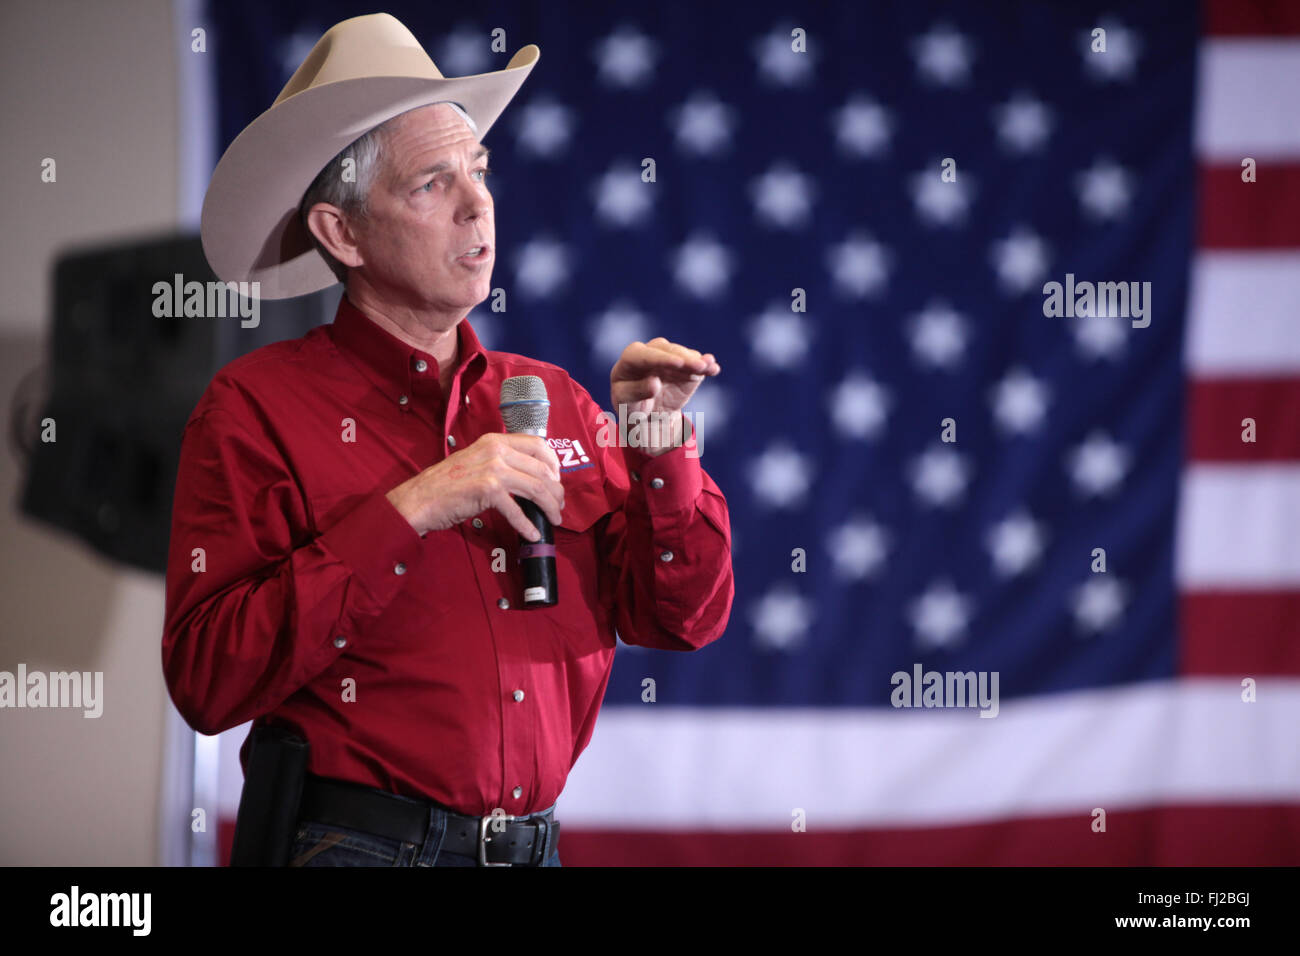 American evangelical Christian conservative political activist David Barton during the Nevada Courageous Conservatives rally with Republican presidential candidate Senator Ted Cruz hosted by Keep the Promise PAC at the Henderson Convention Center February 21, 2016 in Henderson, Nevada. Stock Photo